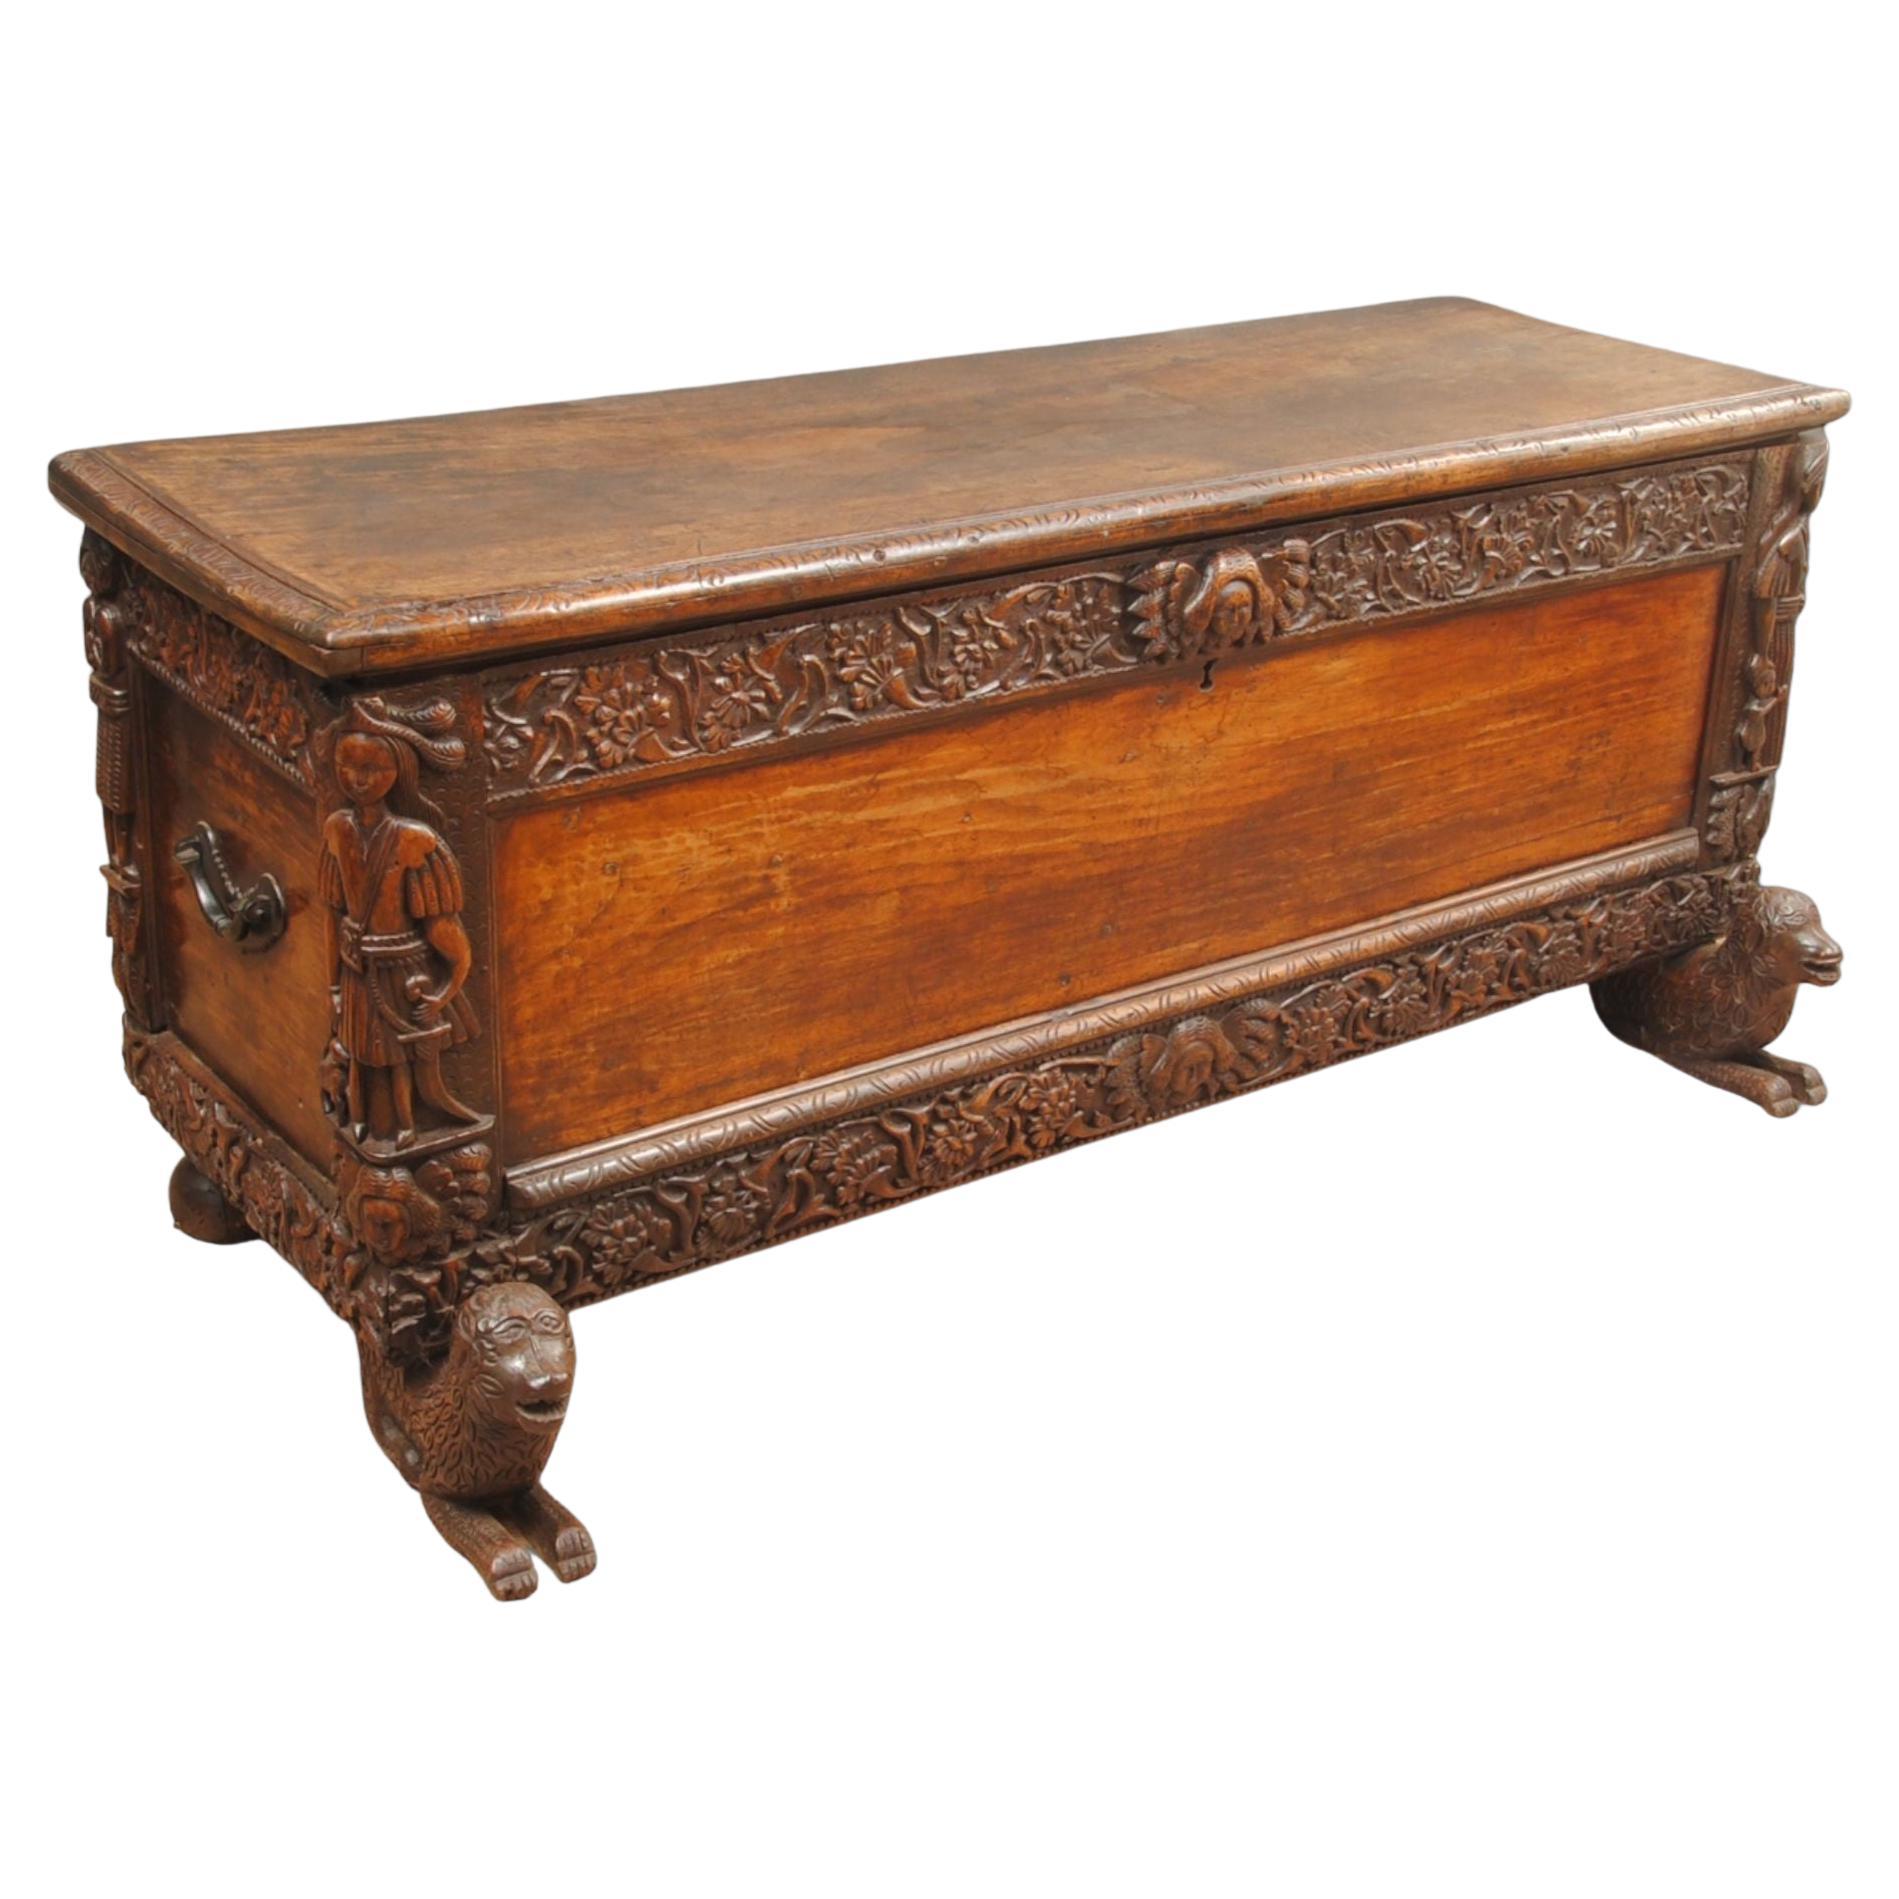 A Rare Spanish Colonial Carved Coffer For Sale